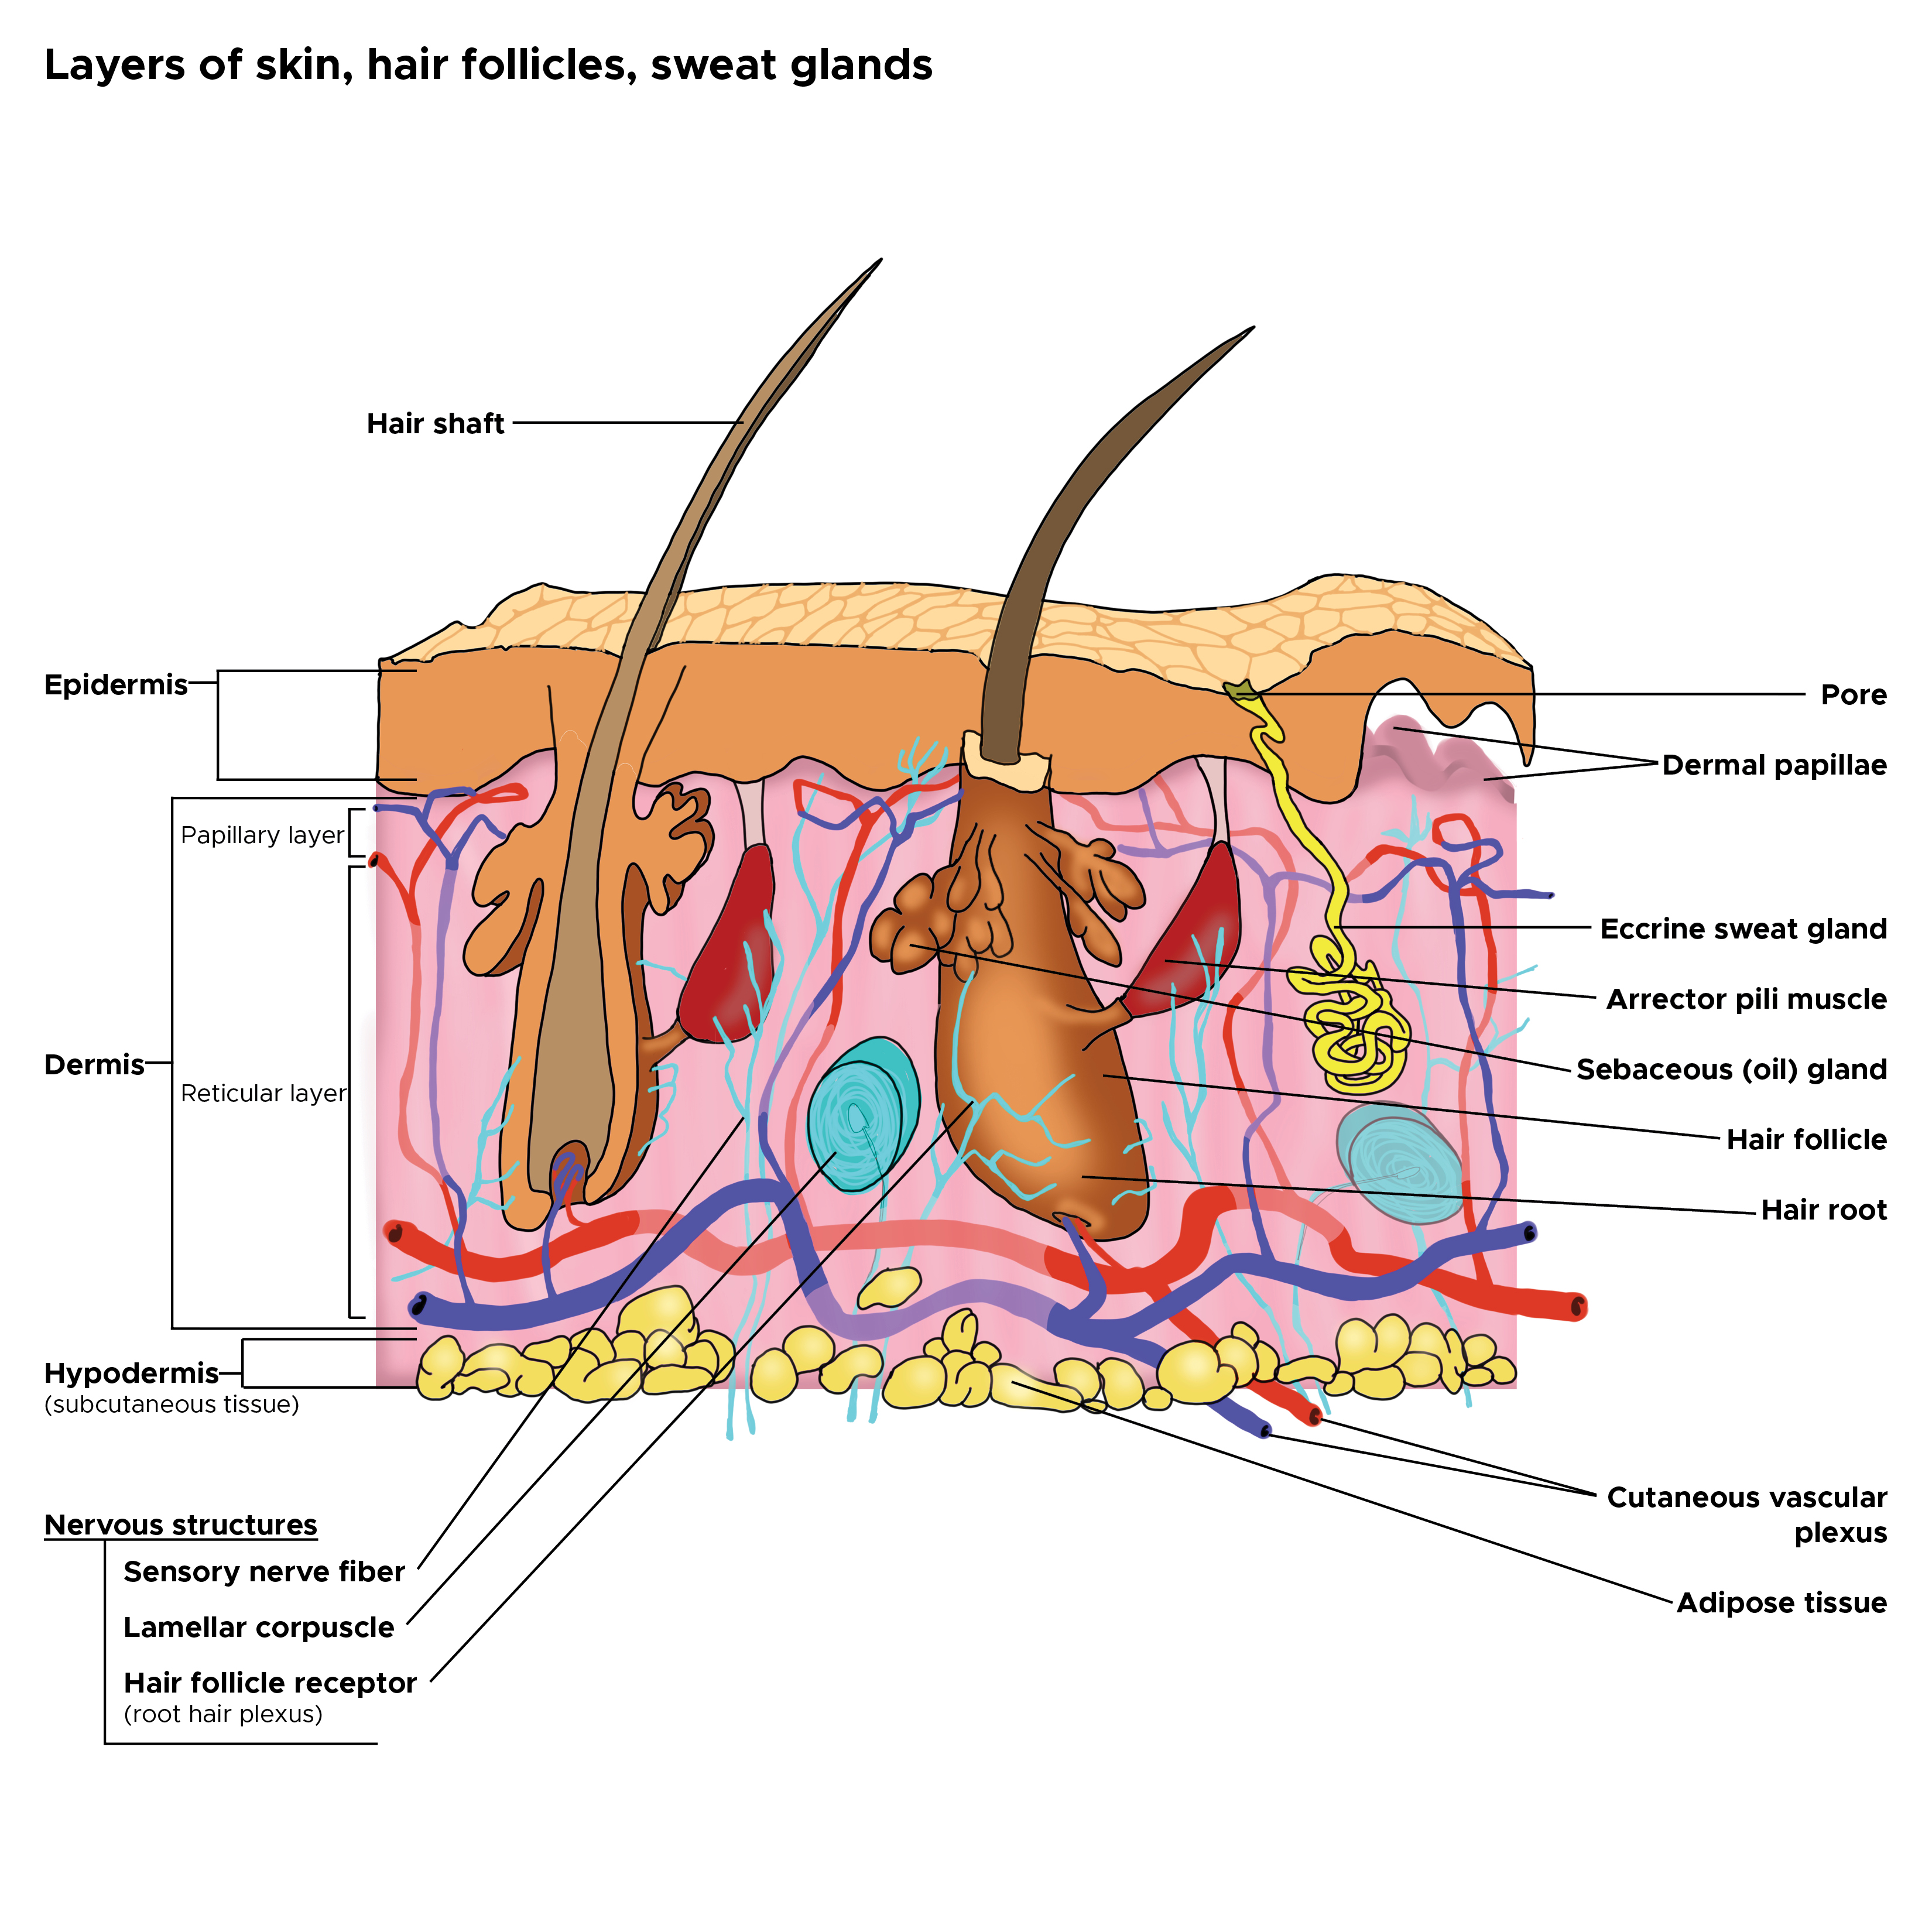 Cross section of layers of the skin. Hair follicles, hair roots and hair shafts, sweat glands, pores, epidermis, dermis, hypodermis. Papillary and reticular layer. Eccrine sweat gland. Arrector pili muscles, sebaceous oil glands. 